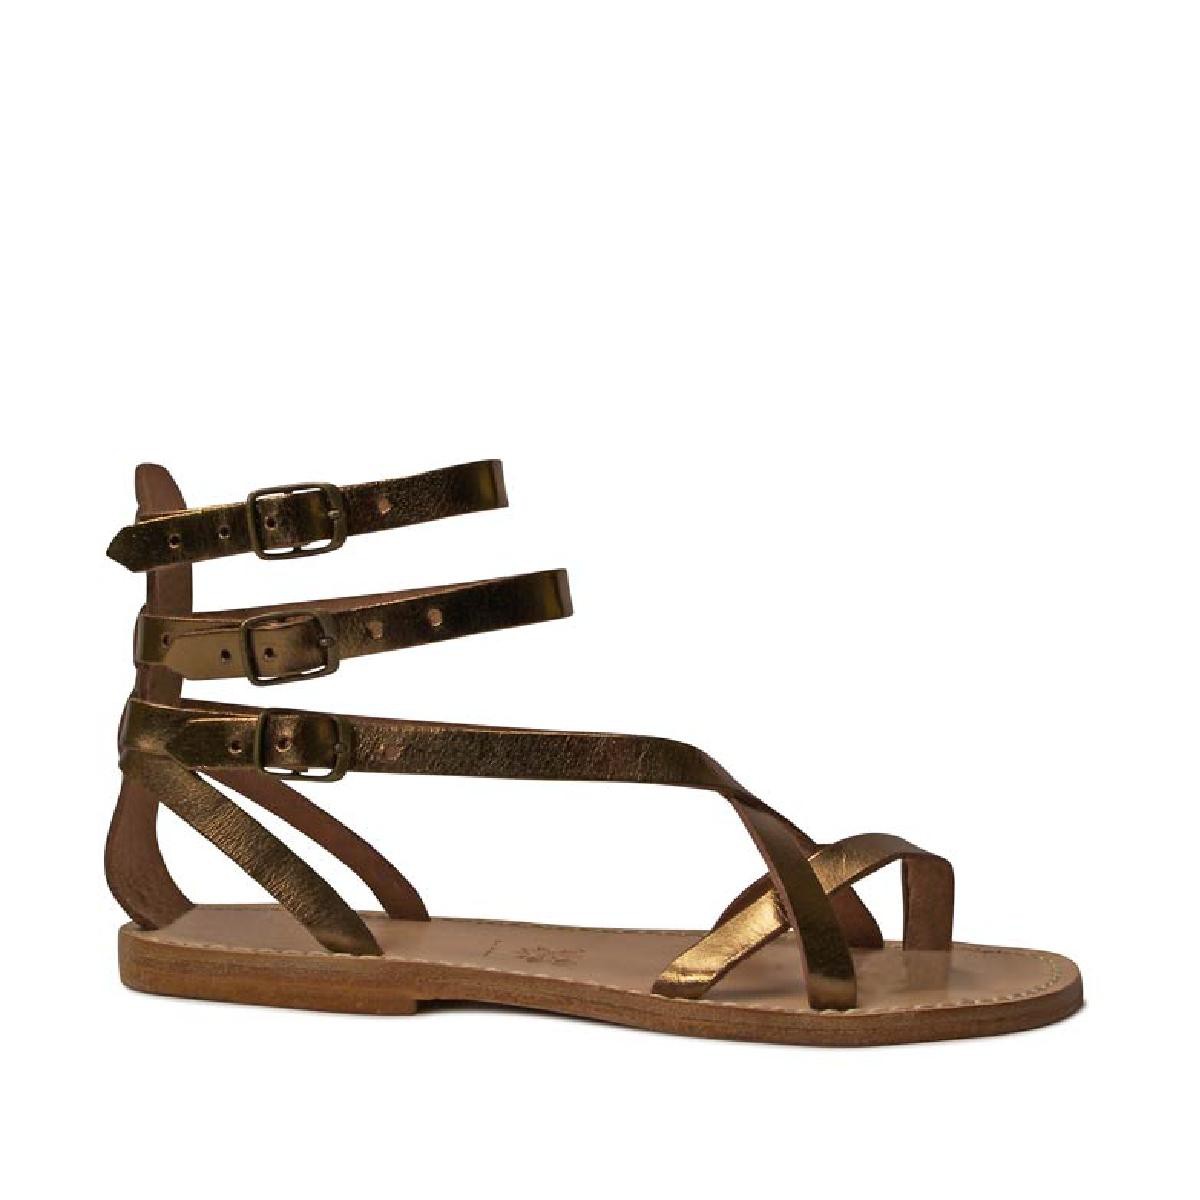 Handmade bronze leather flat gladiator thong sandals | The leather ...